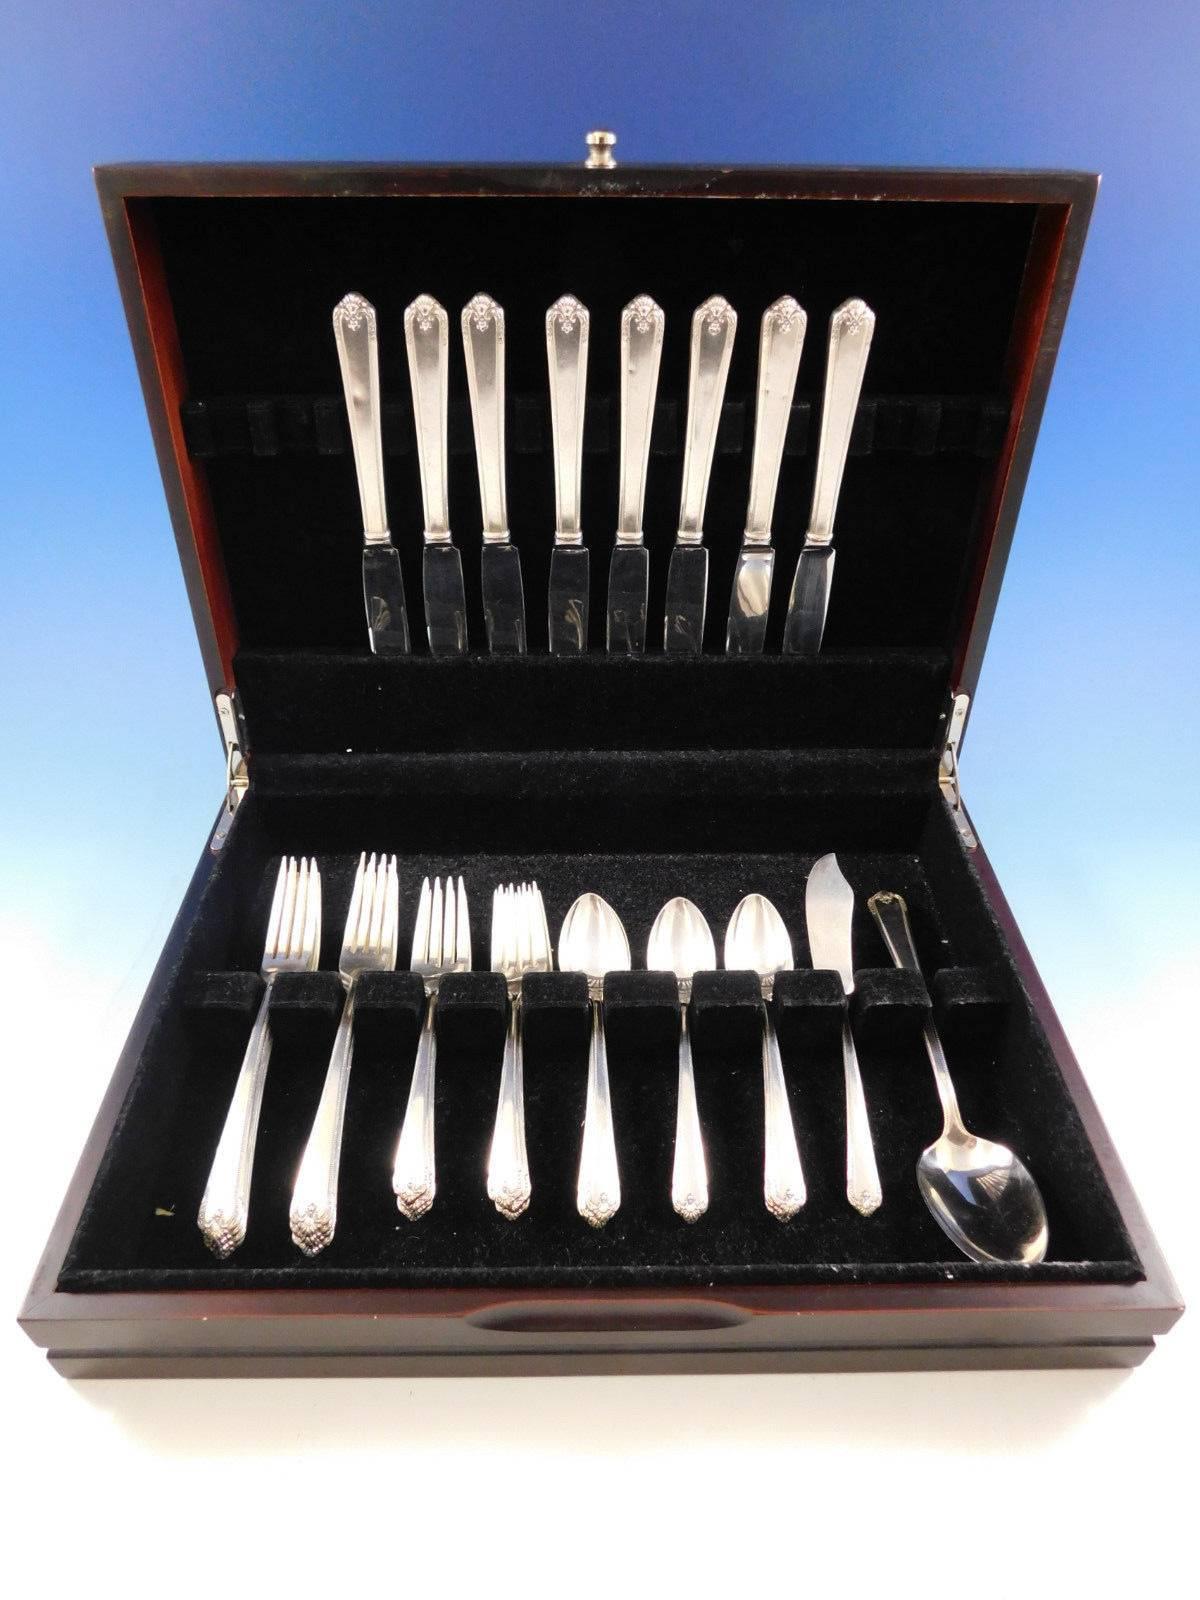 Colonial Manor by Lunt sterling silver Flatware set, 34 pieces. This set includes:

8 Knives, 8 3/4